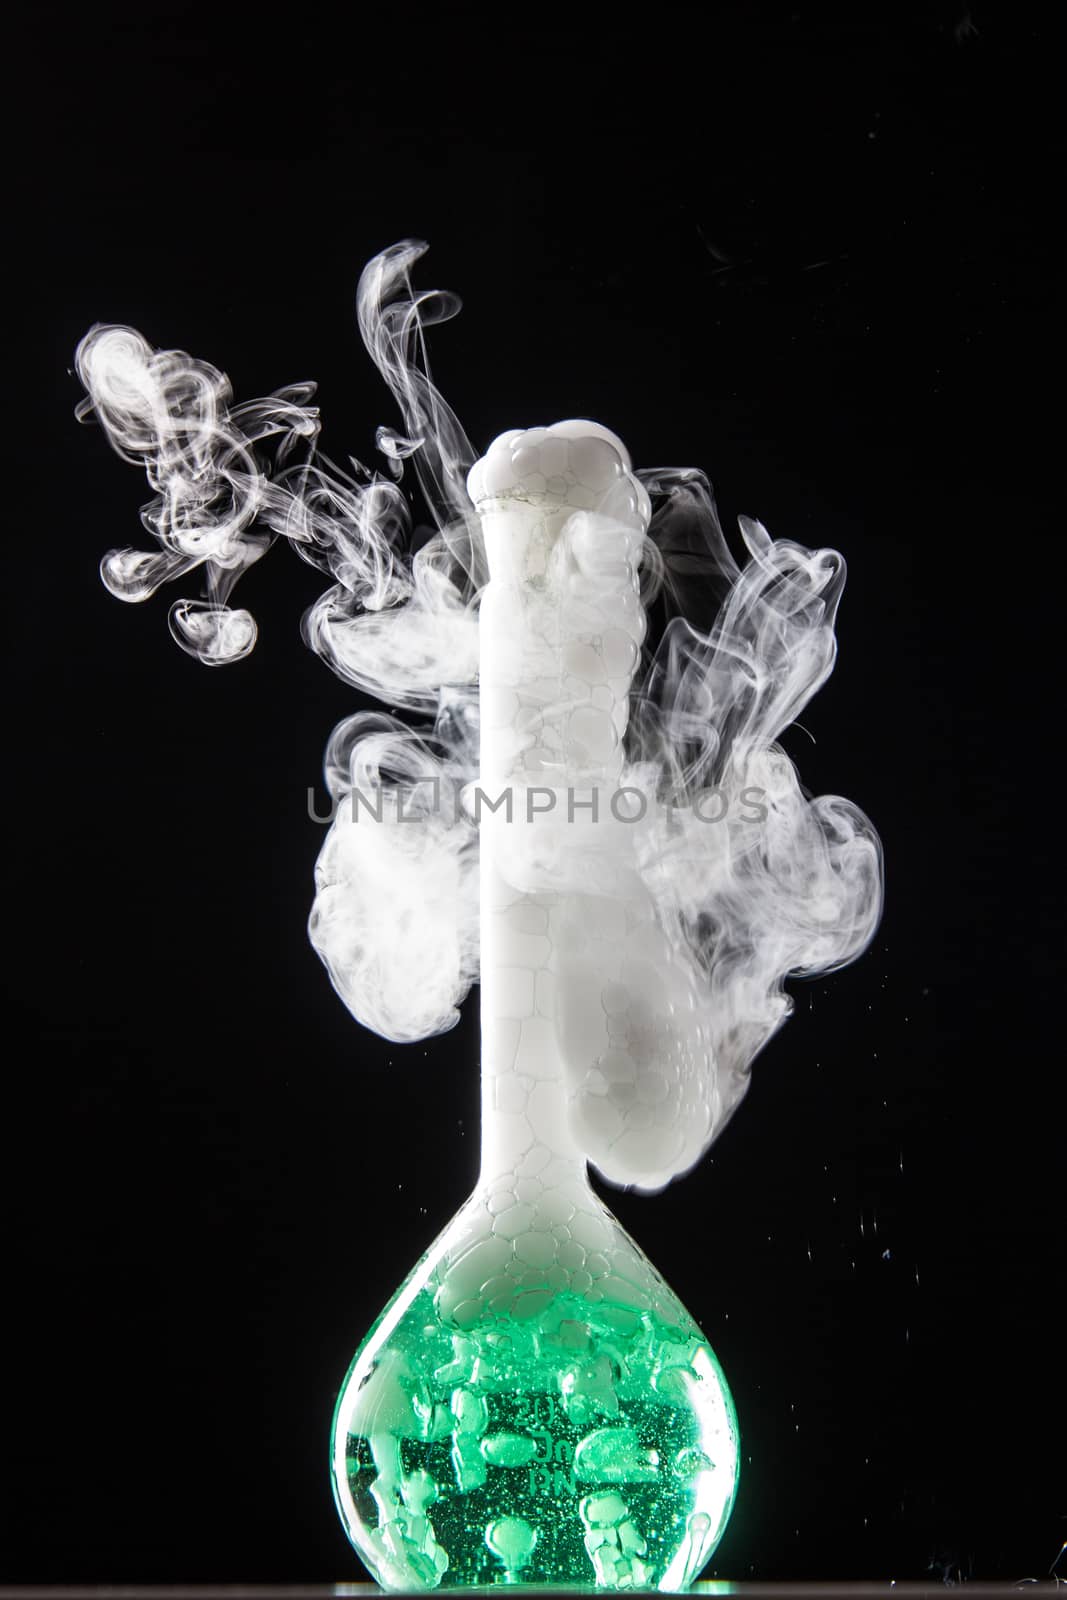 Chemical reaction in volumetric flask glass in labolatory by MichalLudwiczak